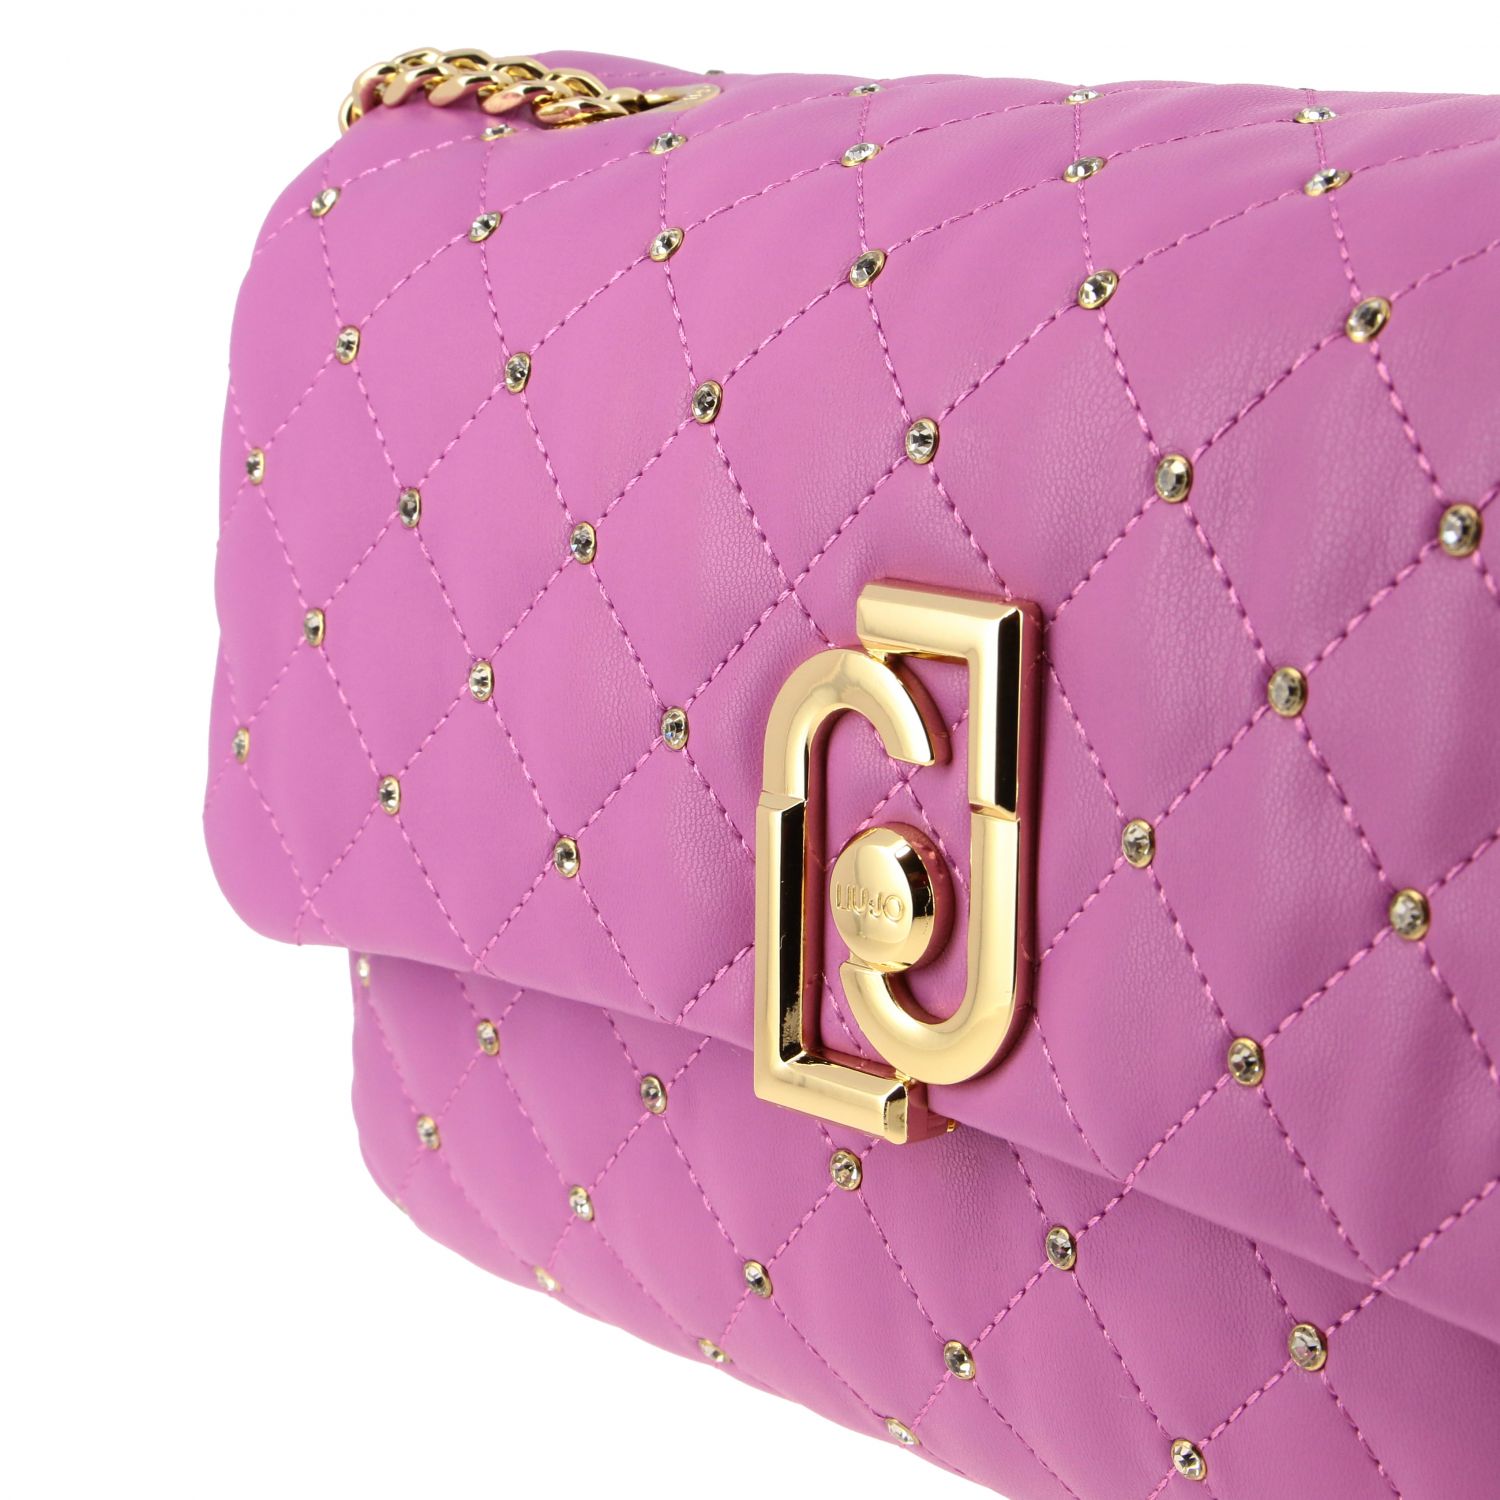 LIU JO: shoulder bag in quilted synthetic leather with rhinestones